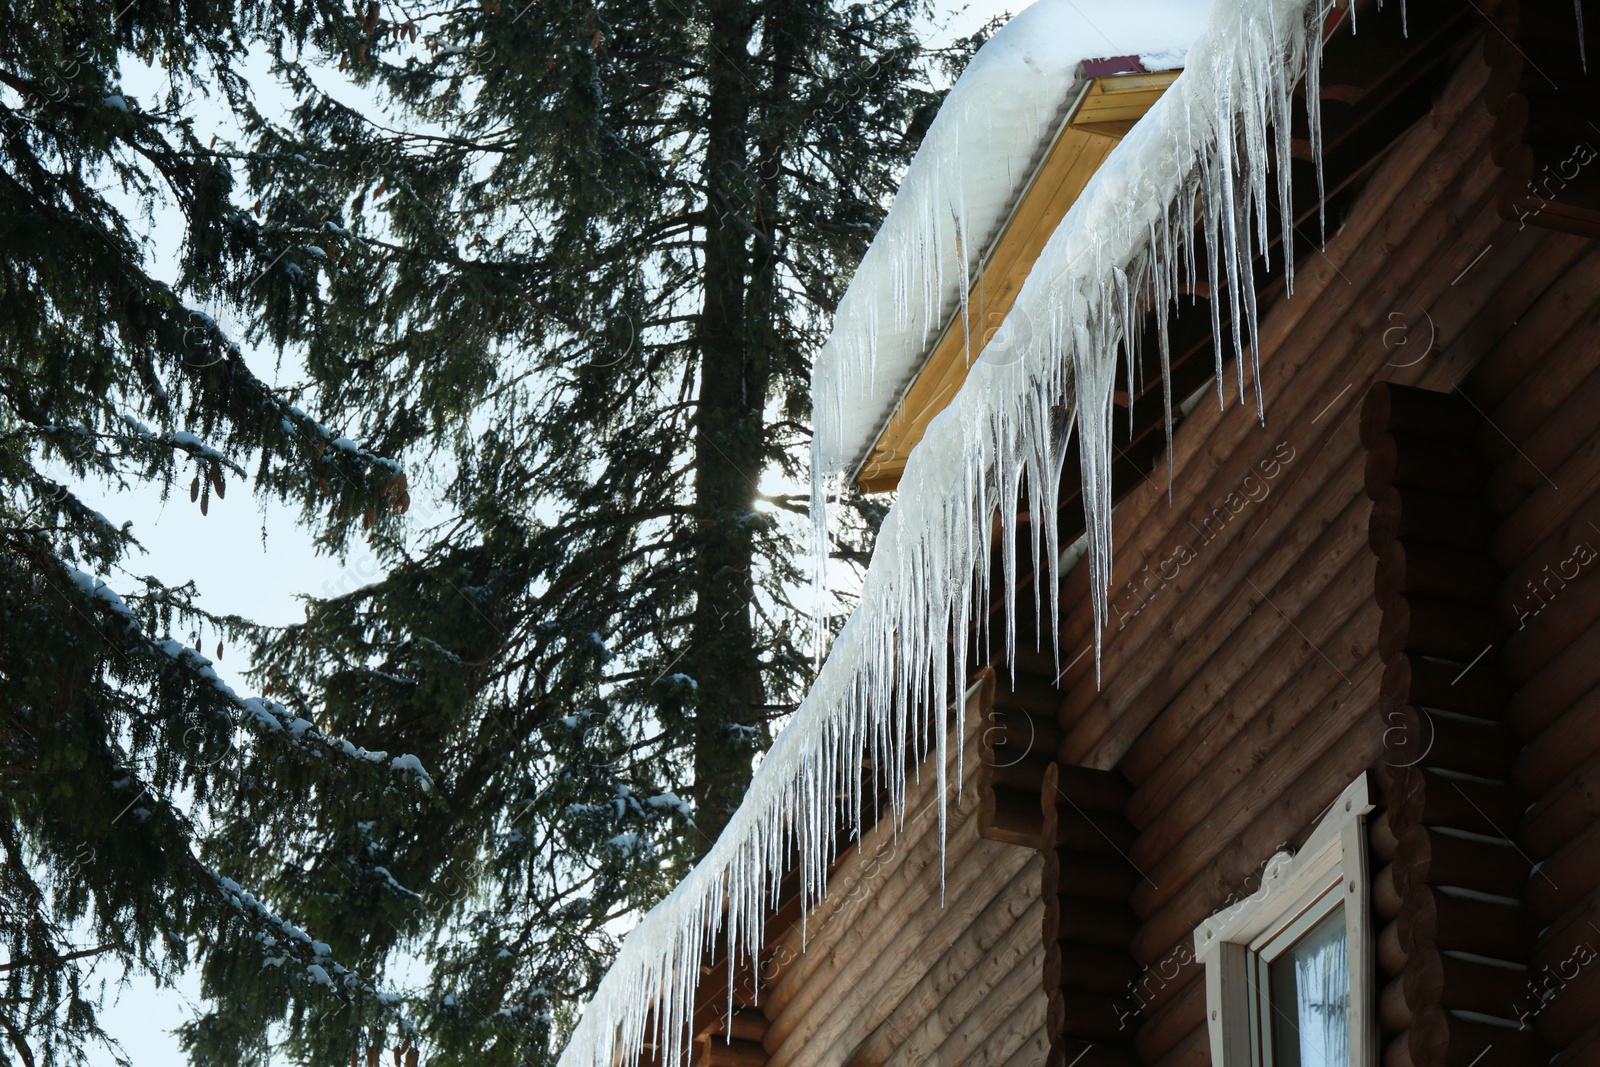 Photo of House with icicles on roof, low angle view. Winter season